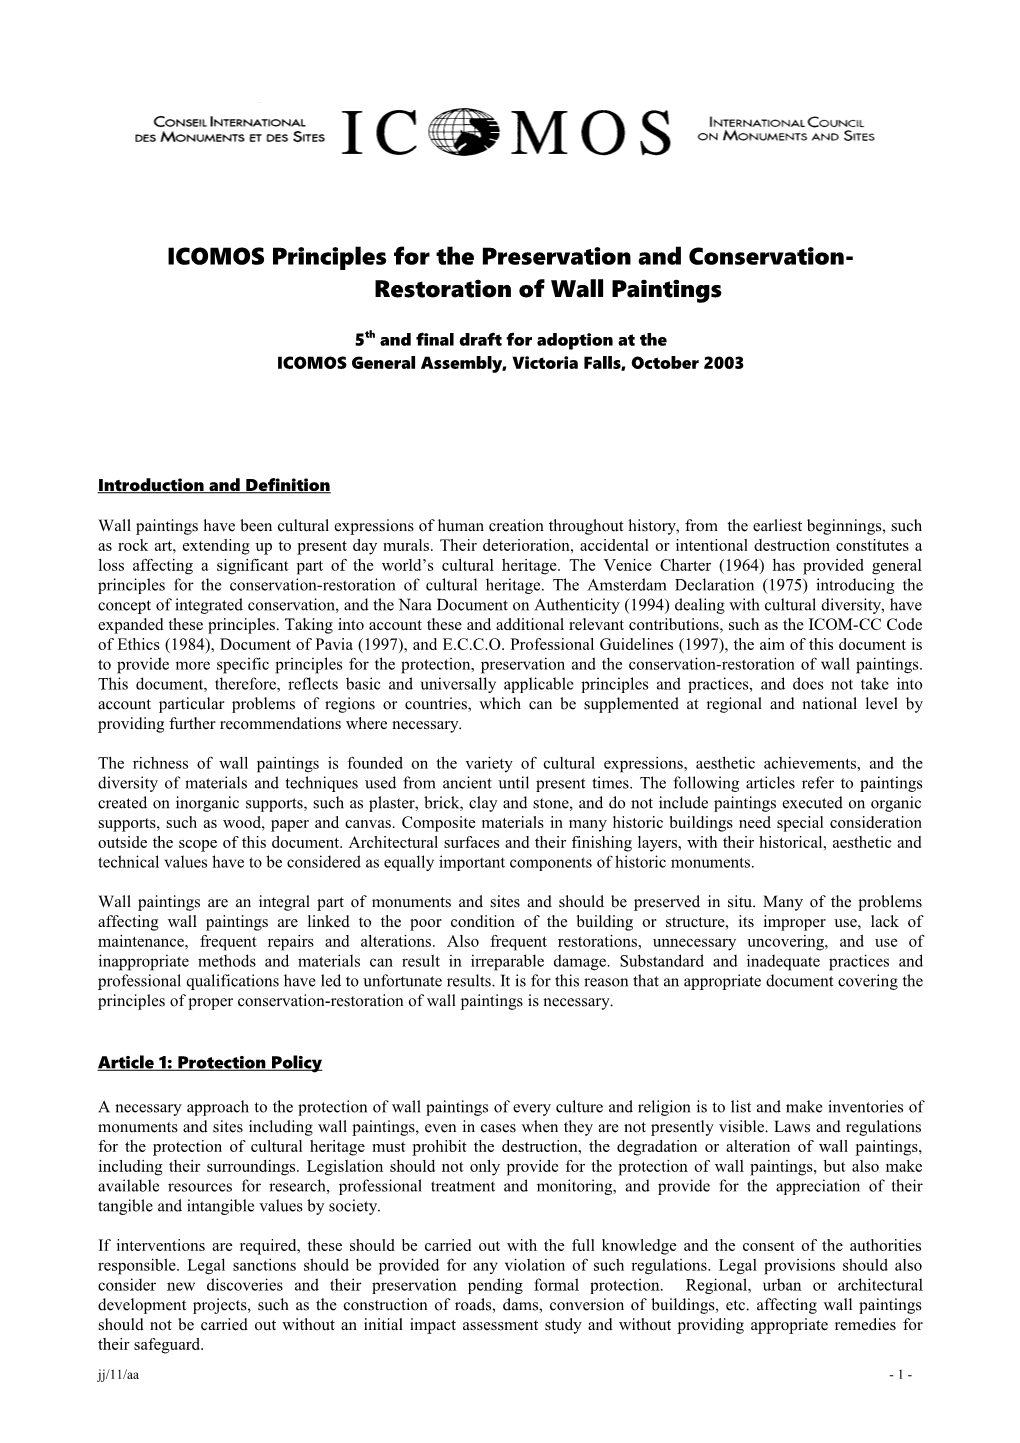 ICOMOS Principles for the Preservation and Conservation-Restoration of Wall Paintings